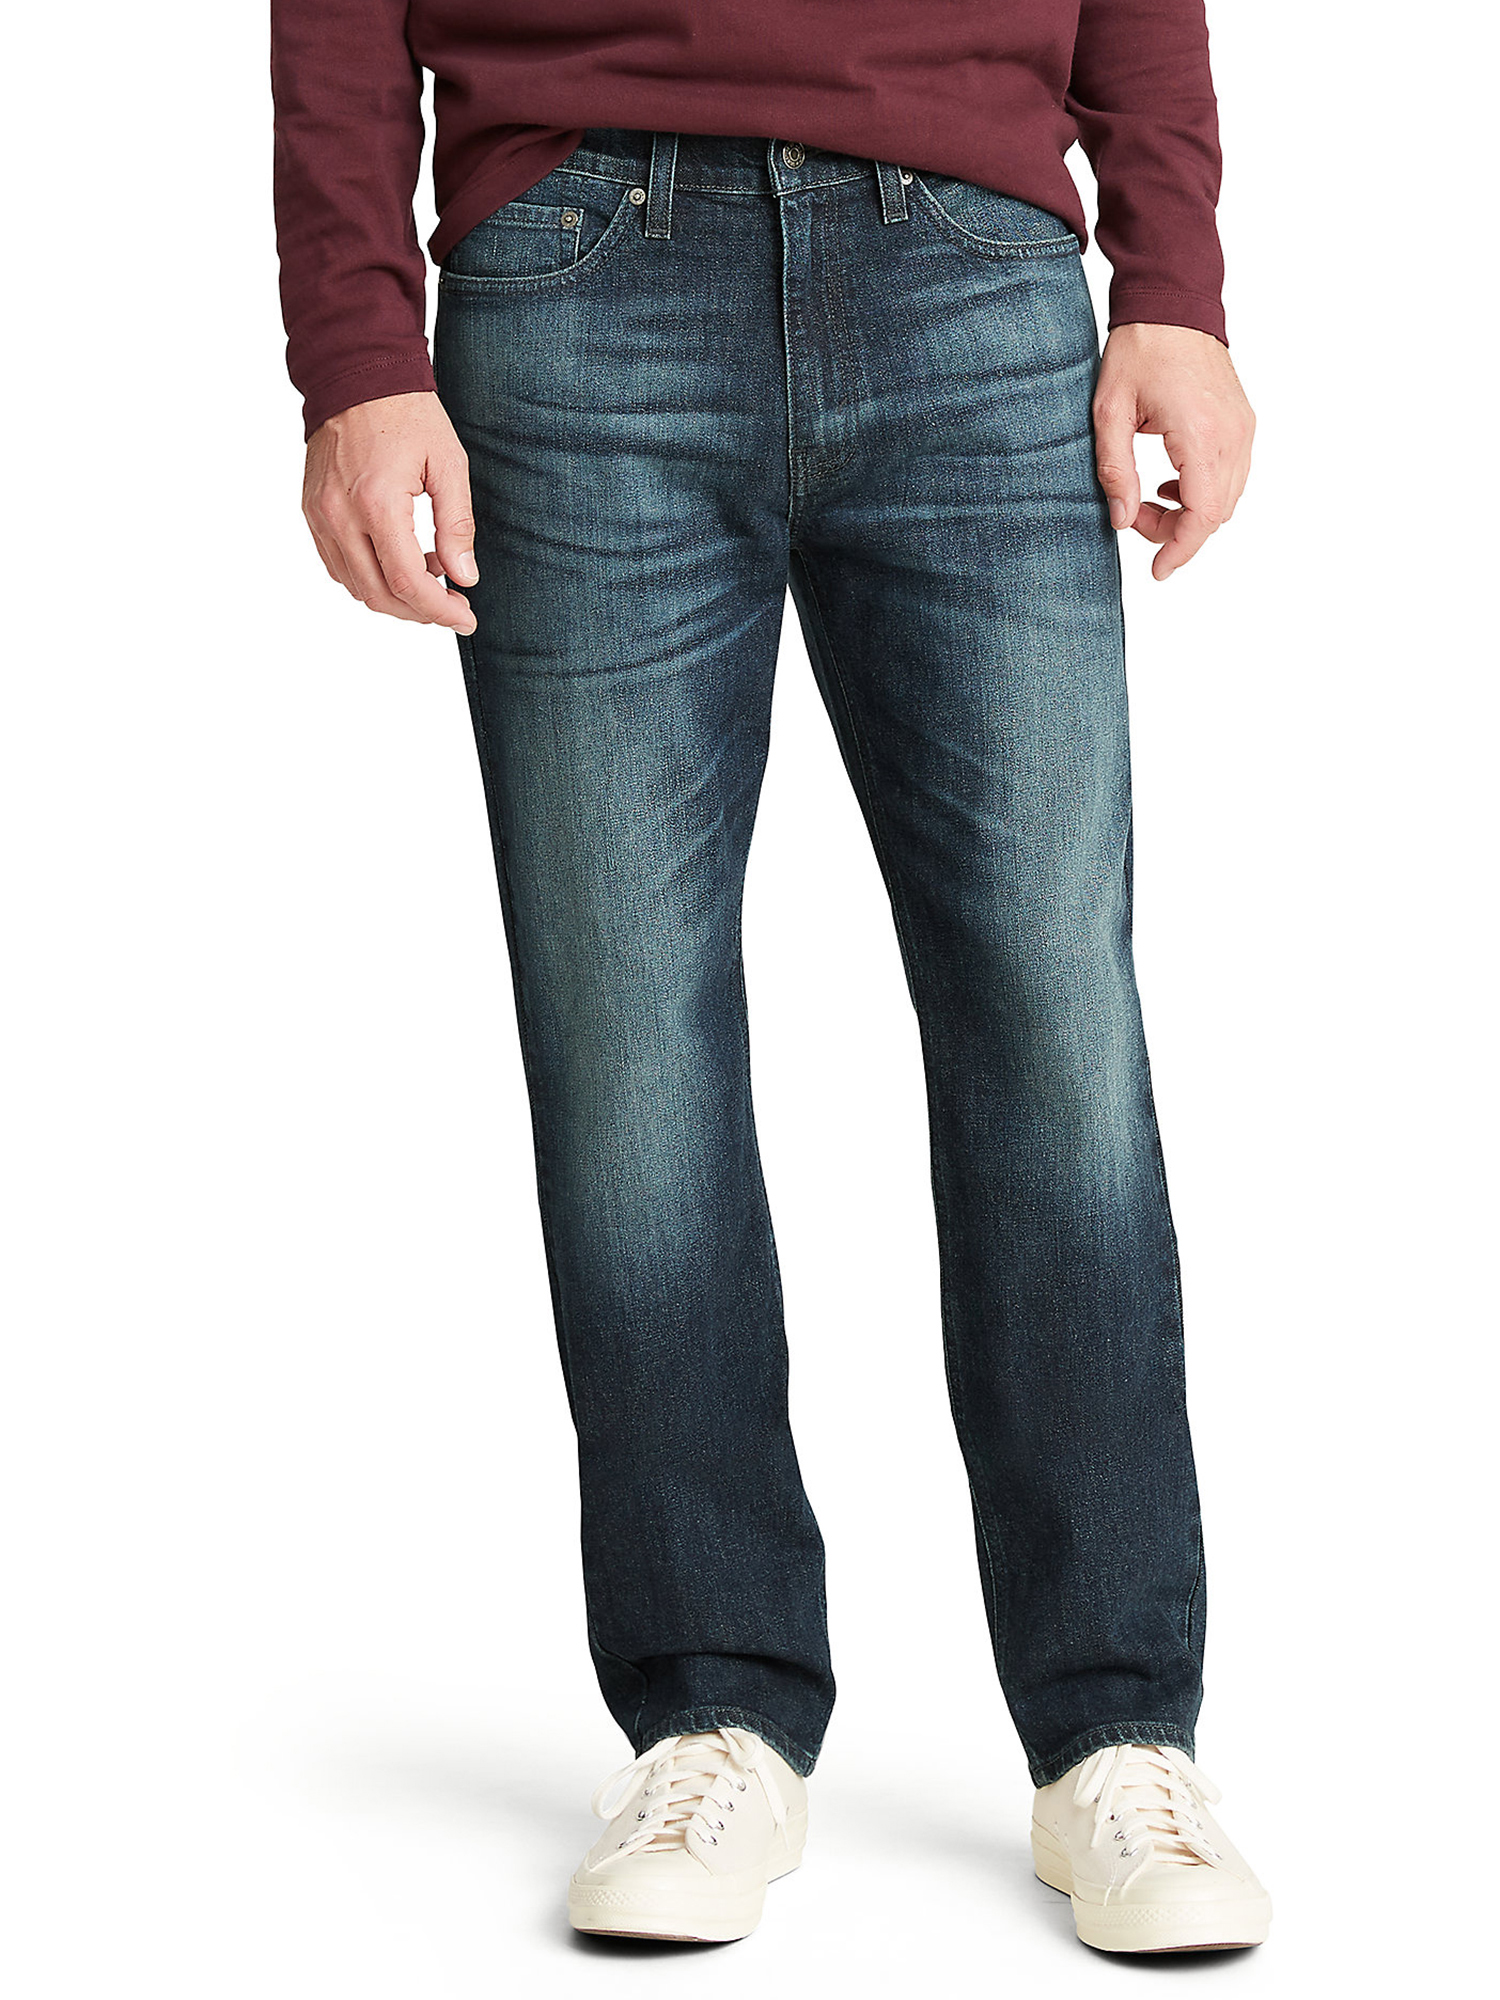 Signature by Levi Strauss & Co. Men's and Big and Tall Athletic Fit Jeans - image 1 of 7